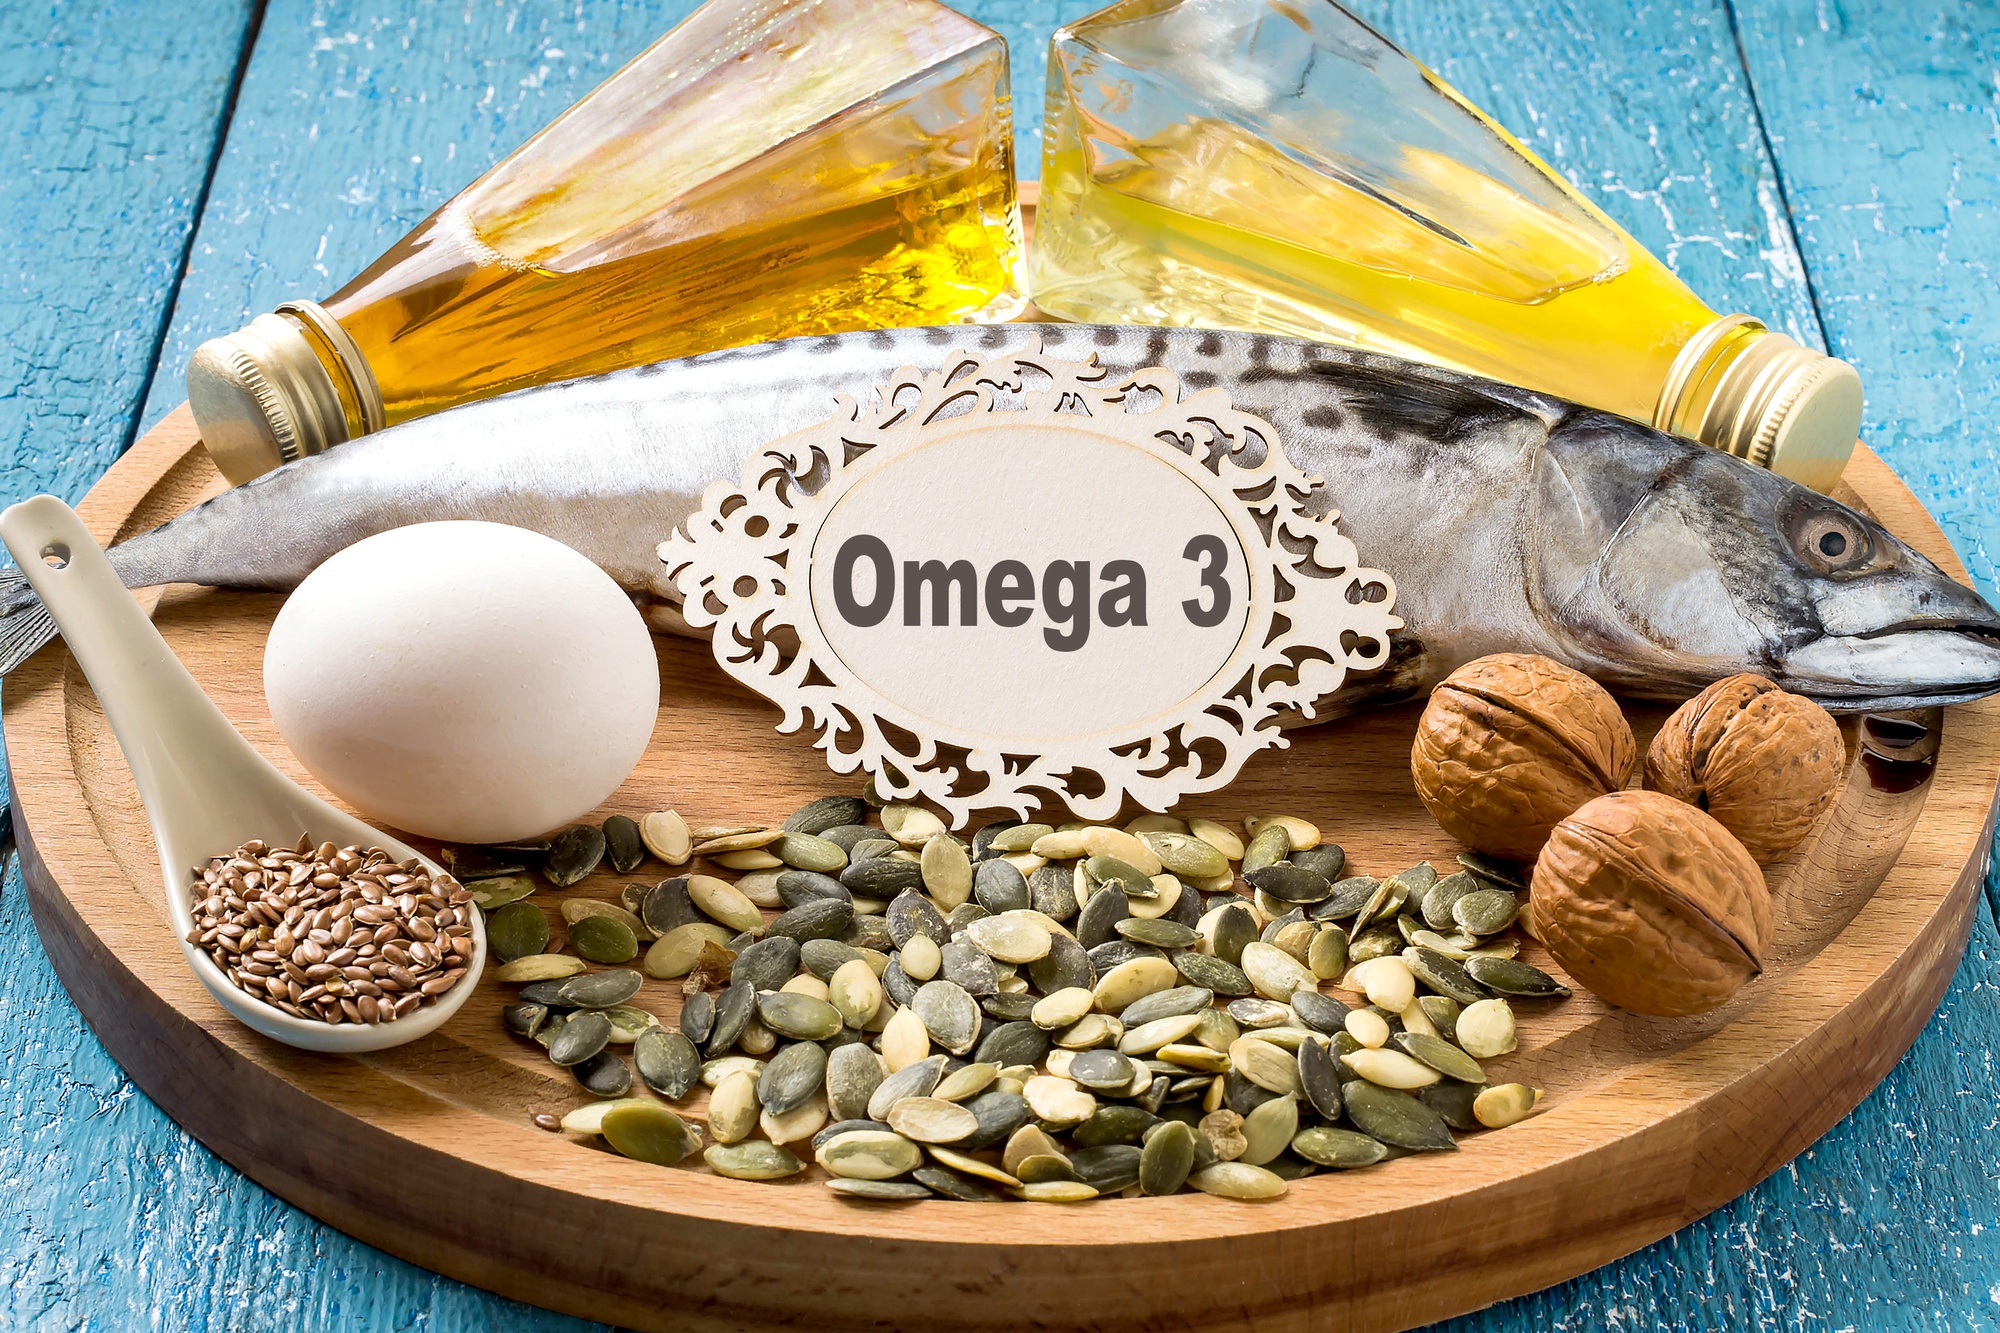 Foods rich in Omega 3 fatty acids help during chikungunya